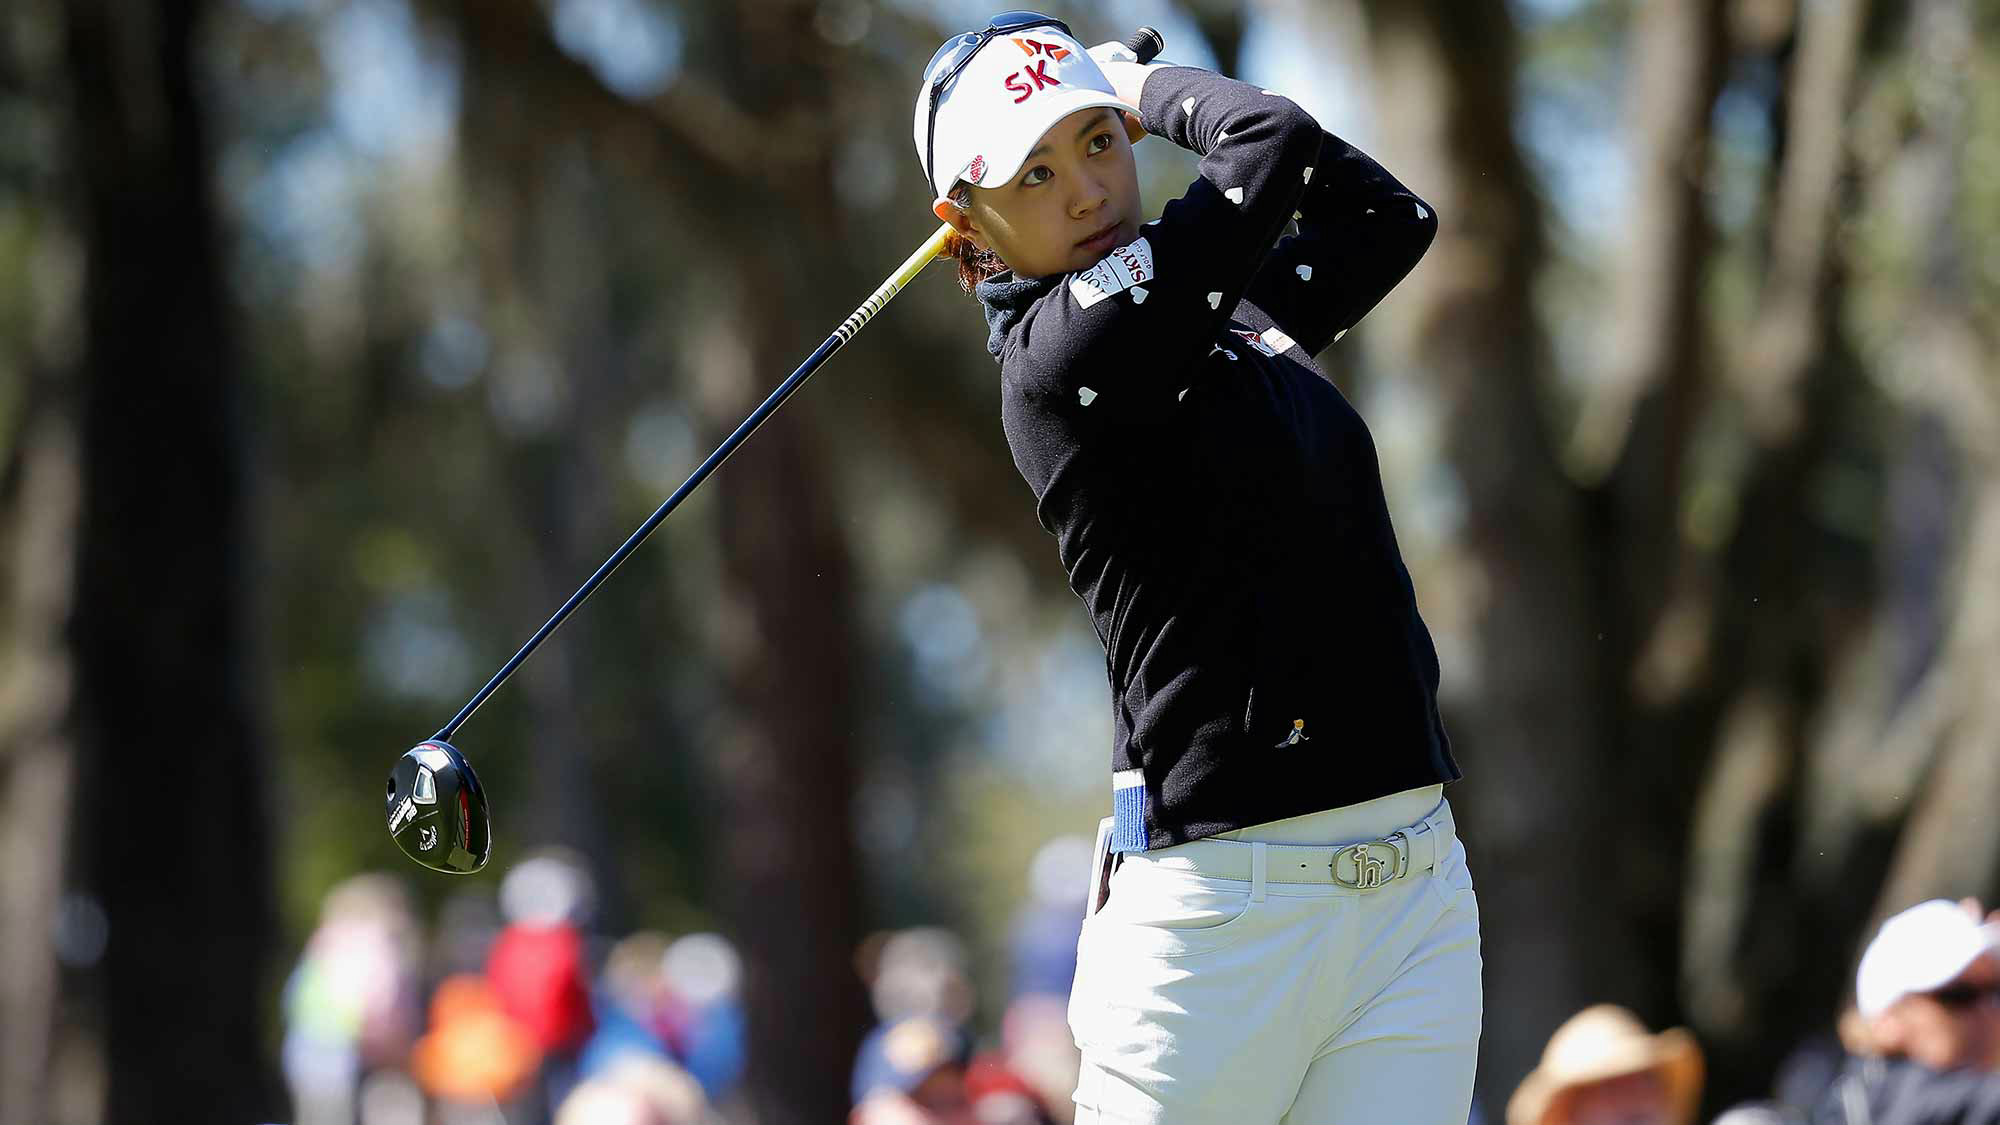 Na Yeon Choi during Final Round at the Golden Ocala Golf & Equestrian Club on January 31, 2015 in Ocala, Florida